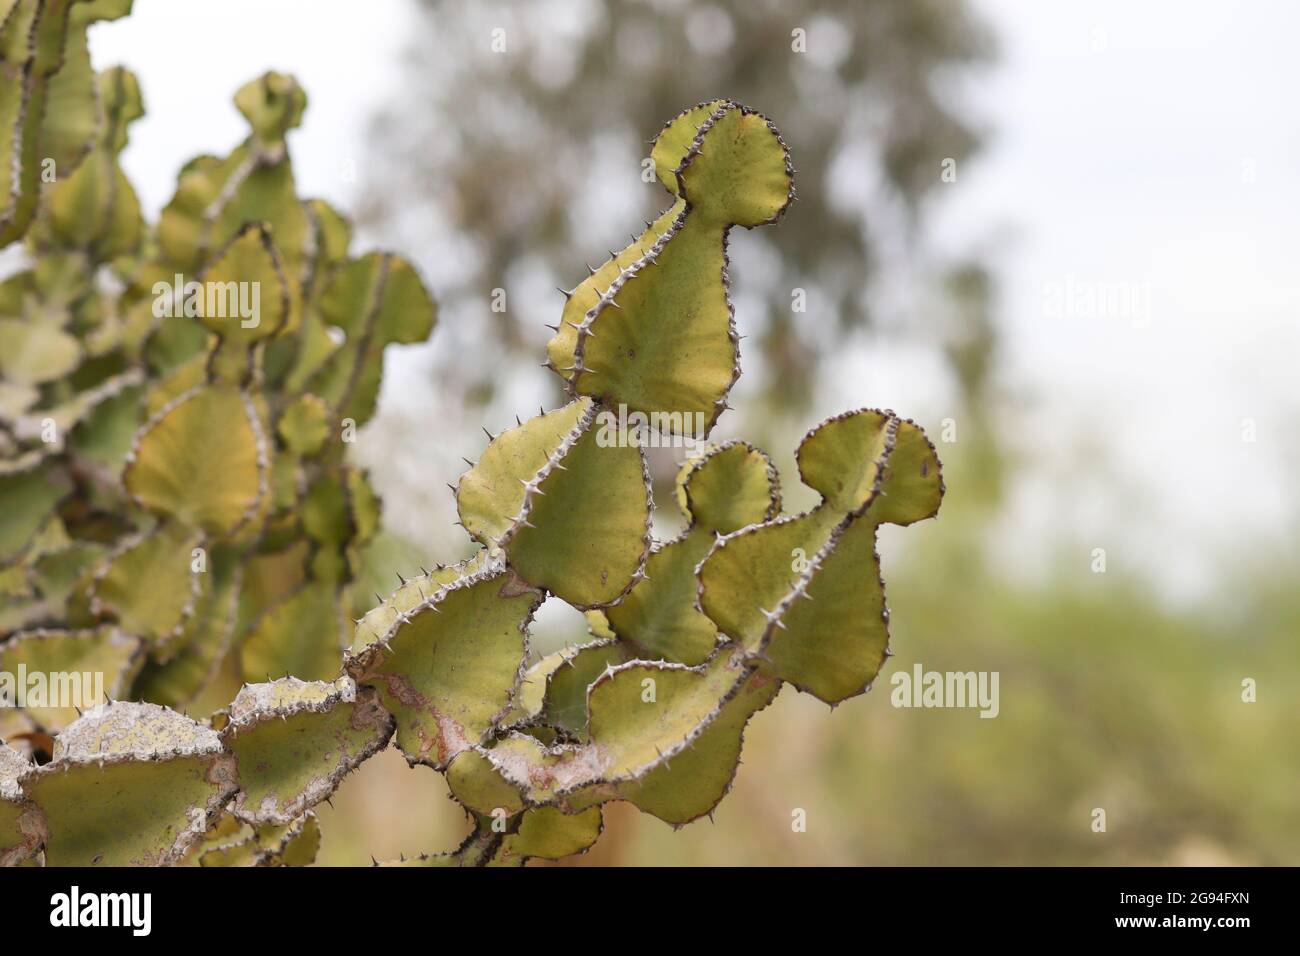 Candelabra Cactus branches with spade shaped branches Stock Photo